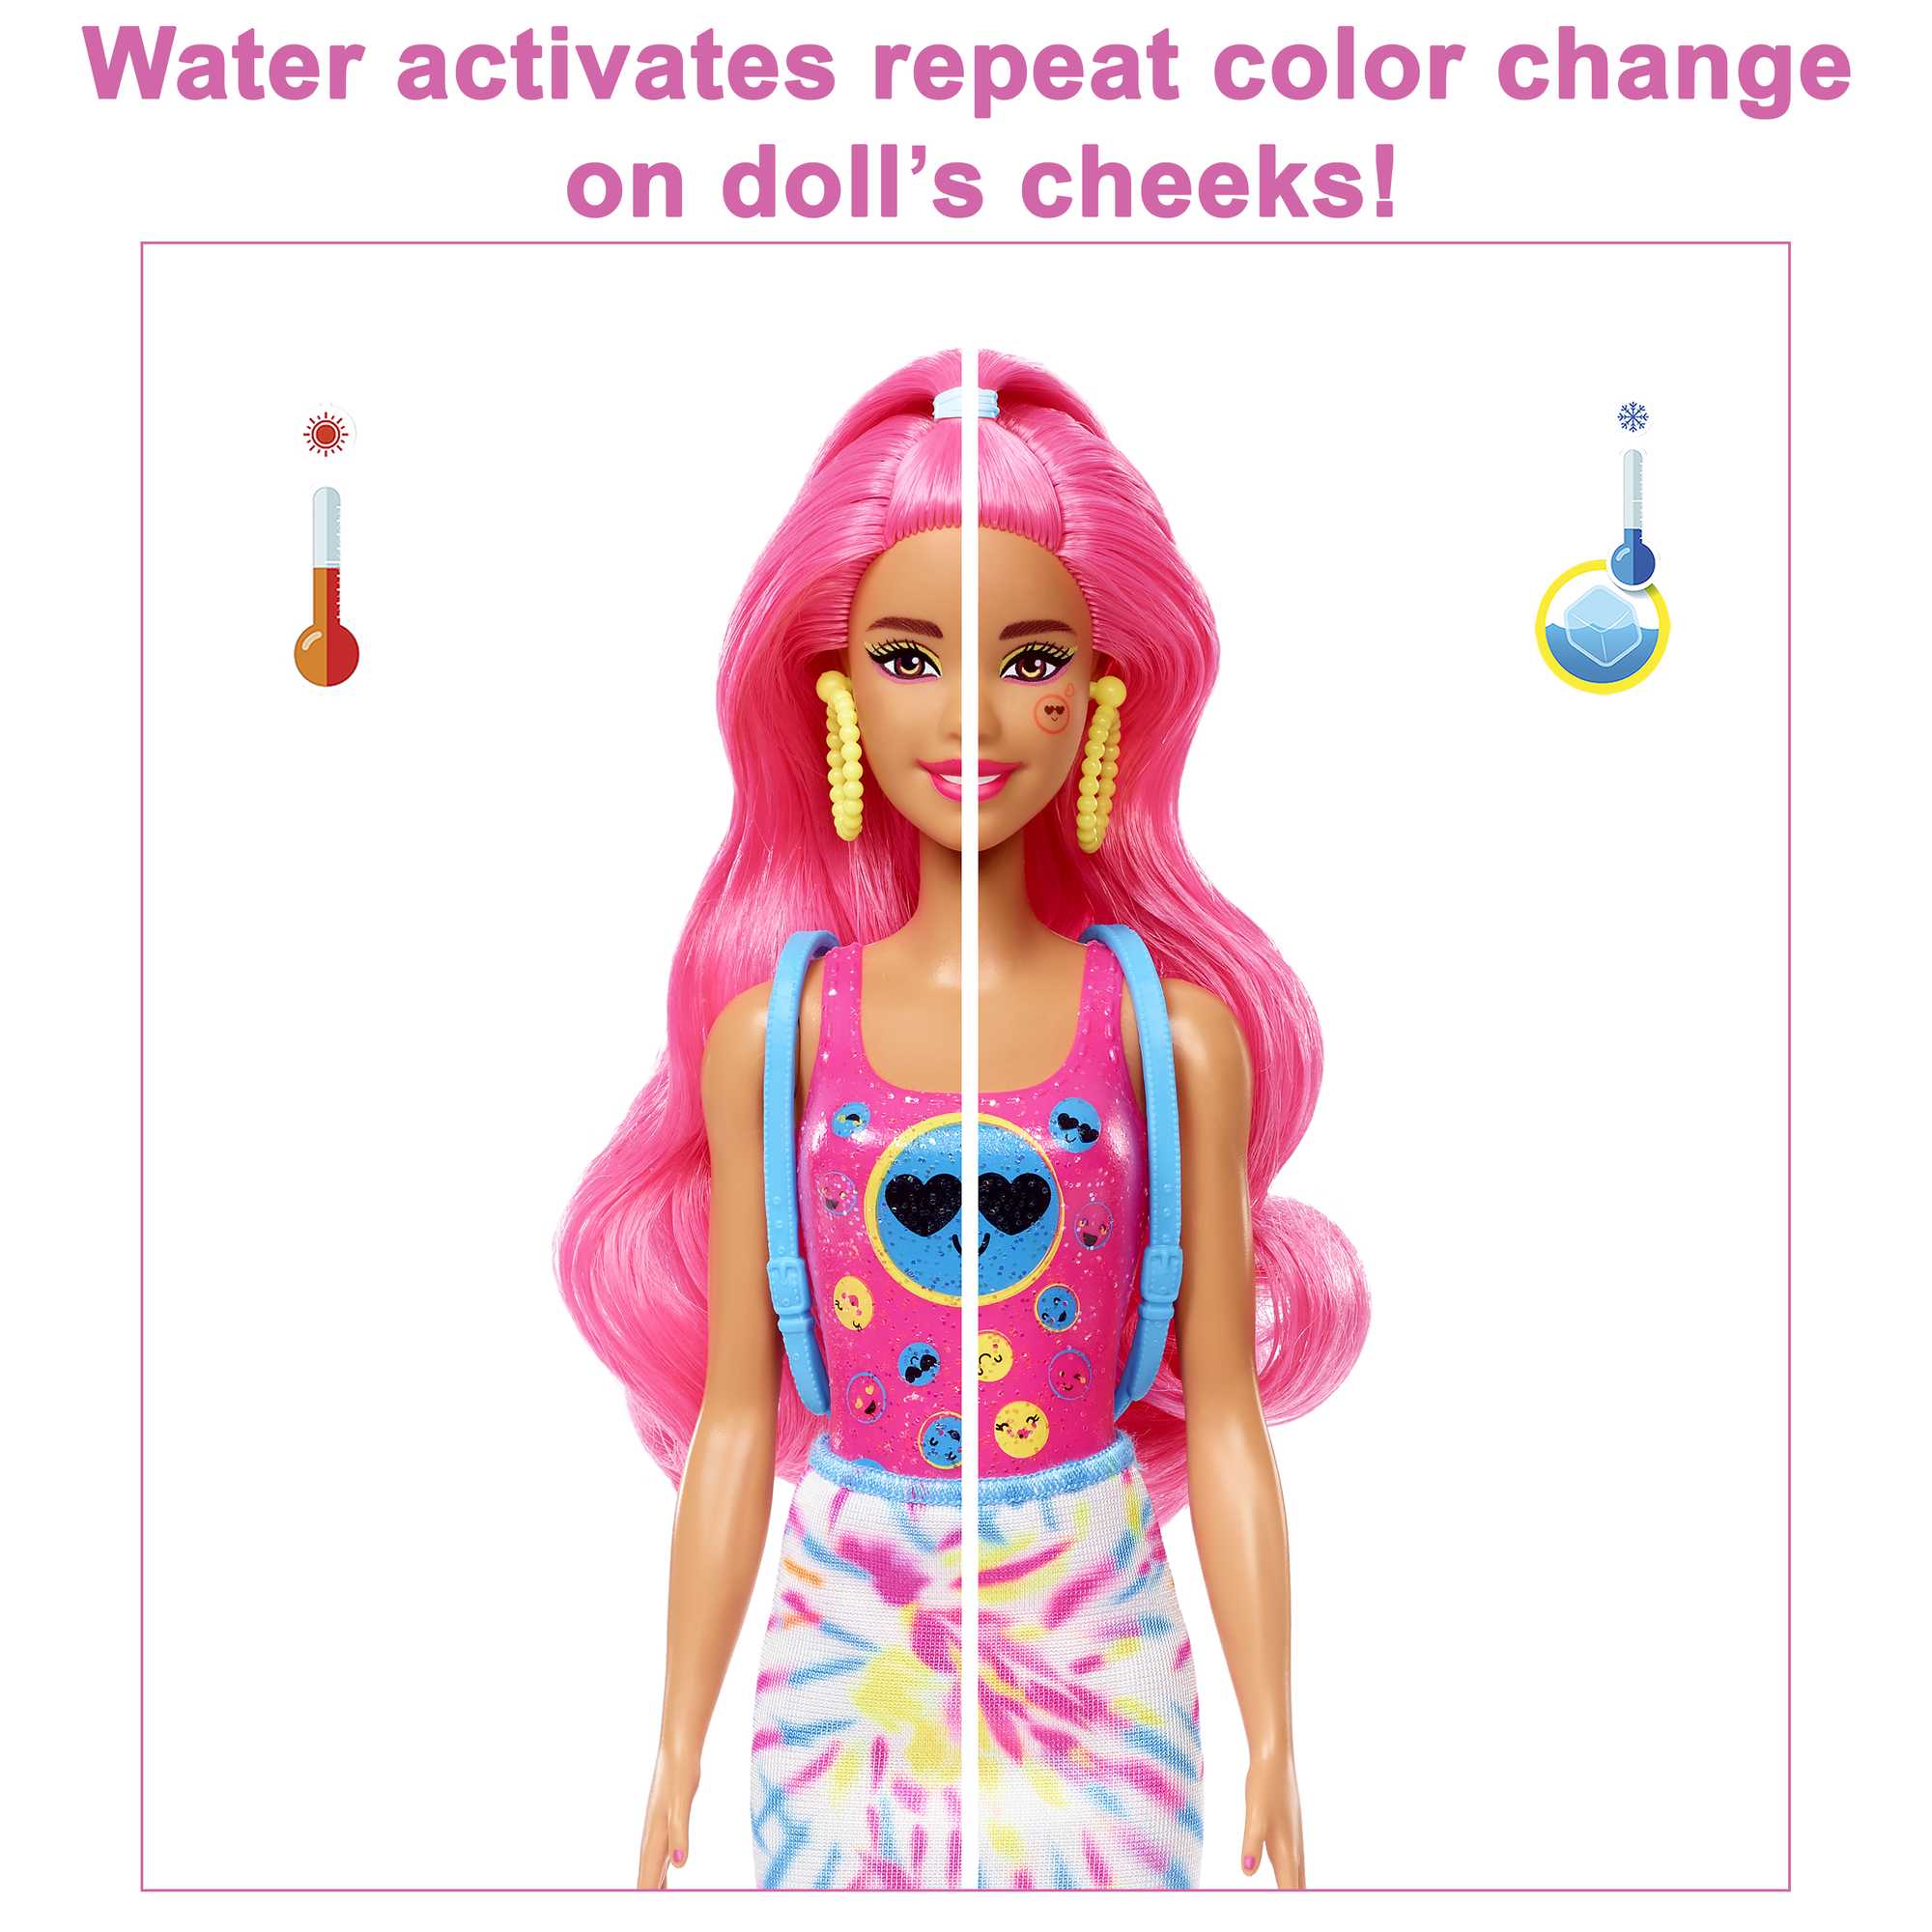 Barbie Color Reveal Totally Neon Fashions Doll | Mattel